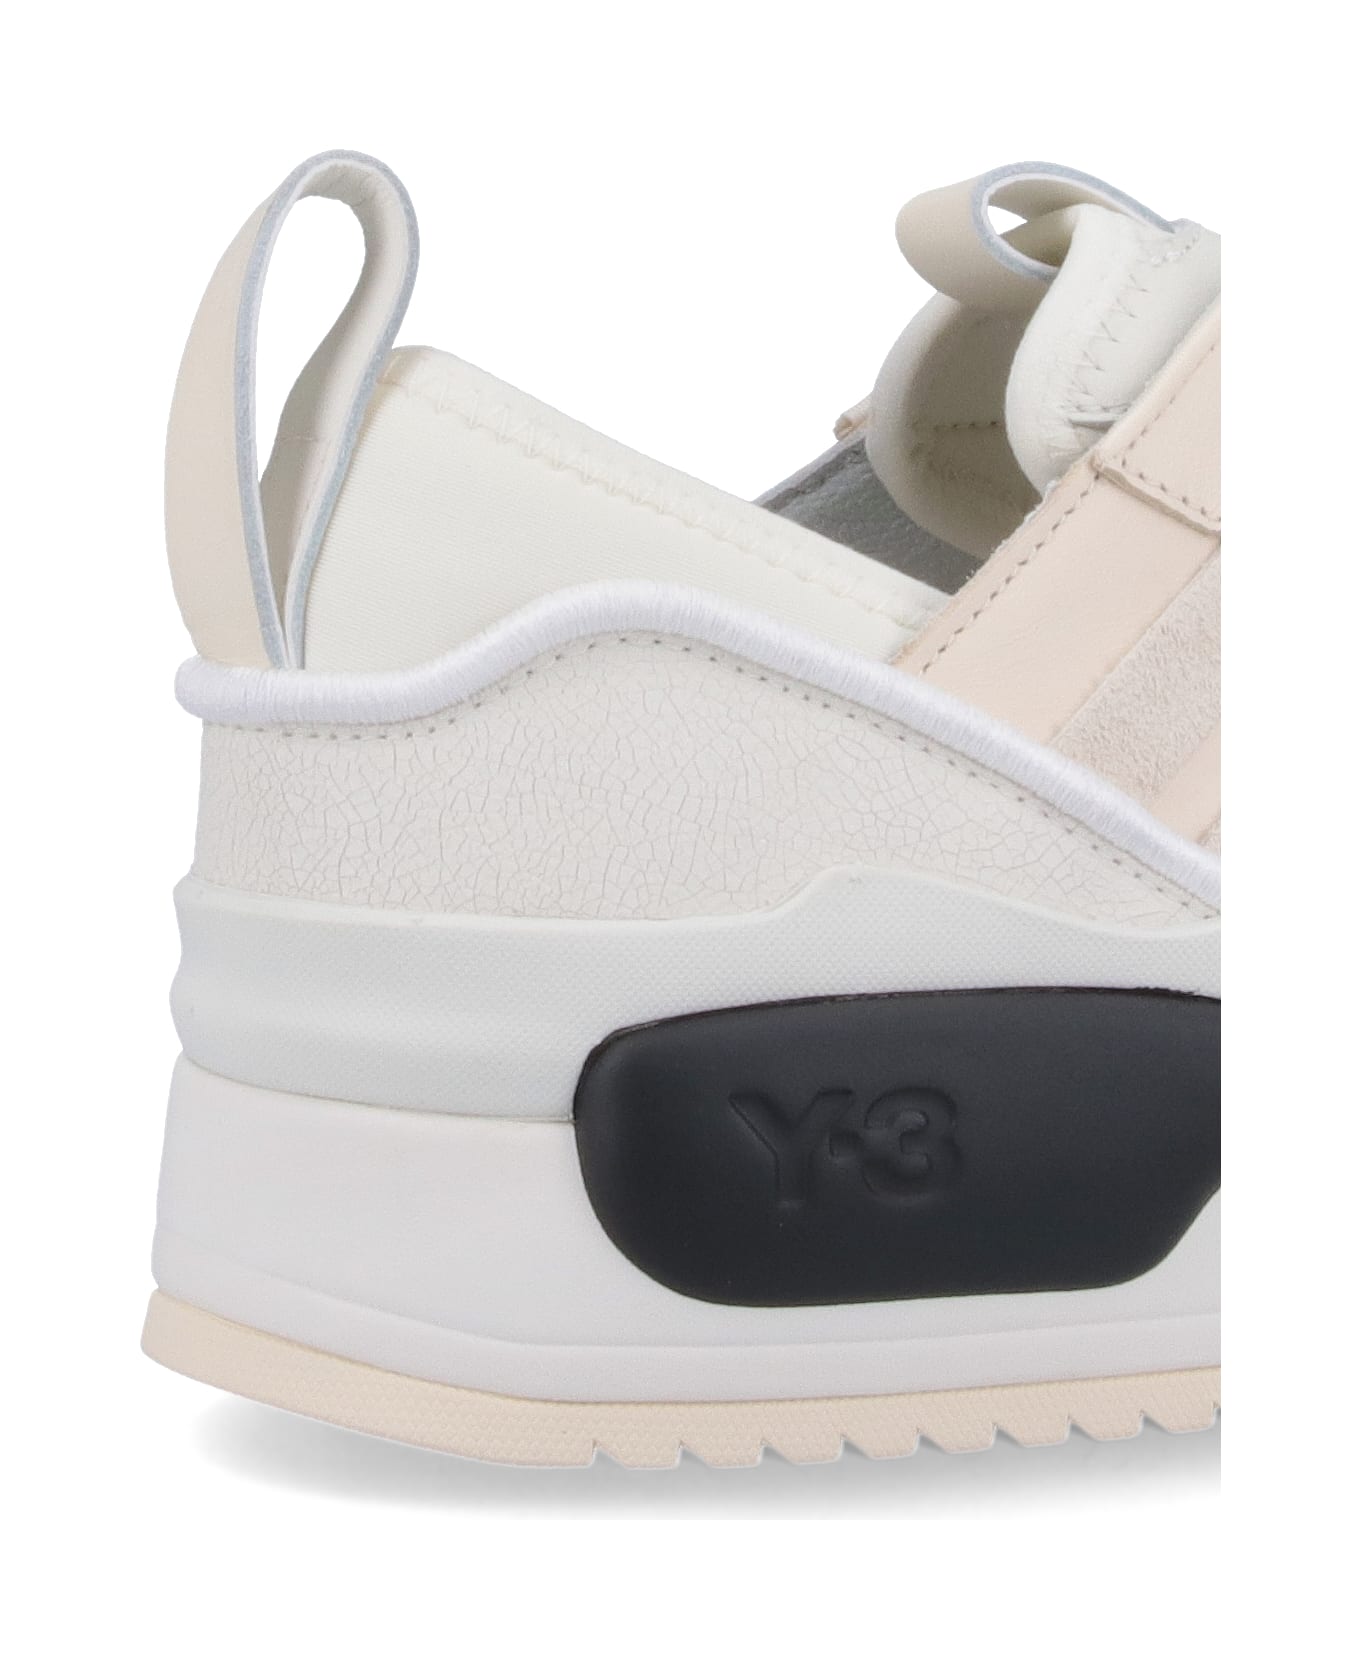 Y-3 'rivarly' Sneakers - White スニーカー